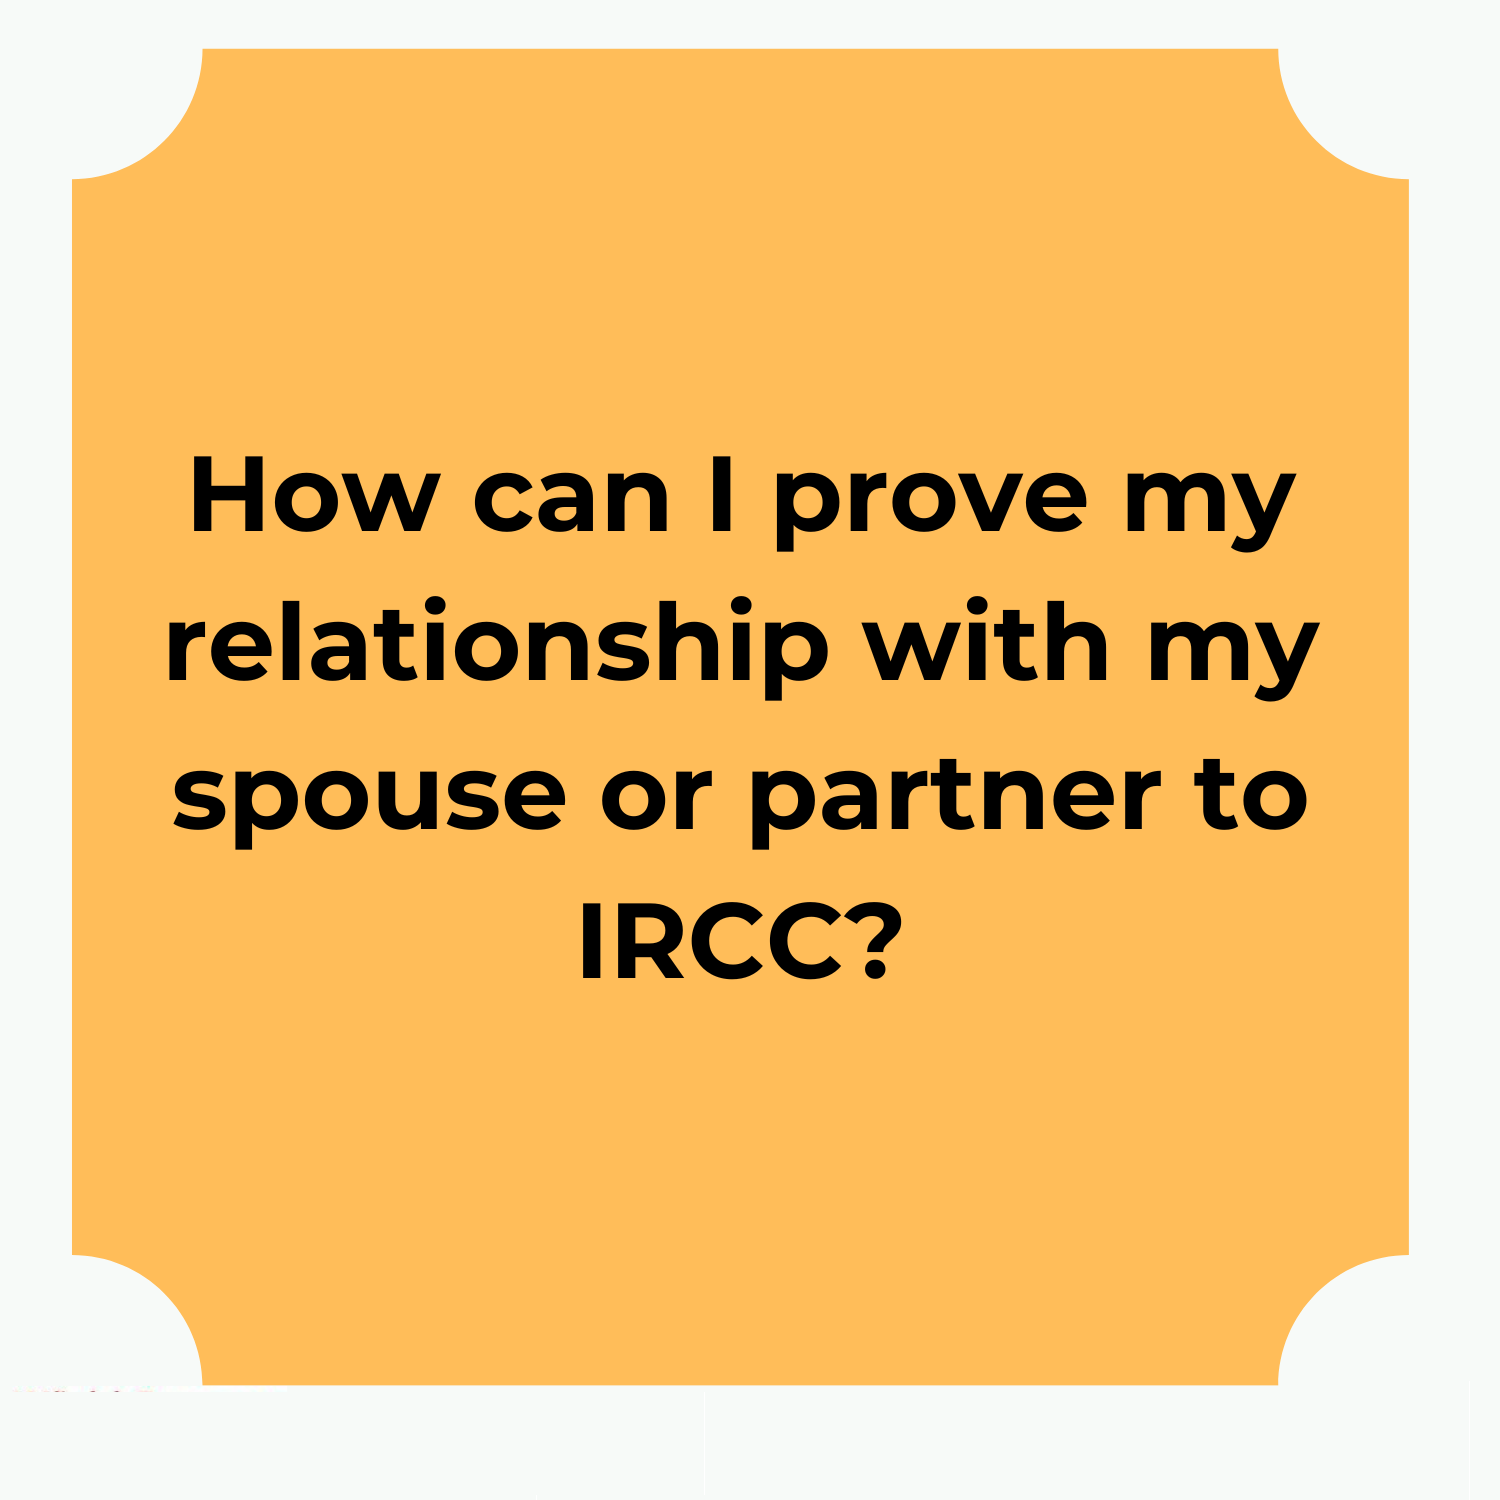 How can I prove my relationship with my spouse or partner to IRCC?